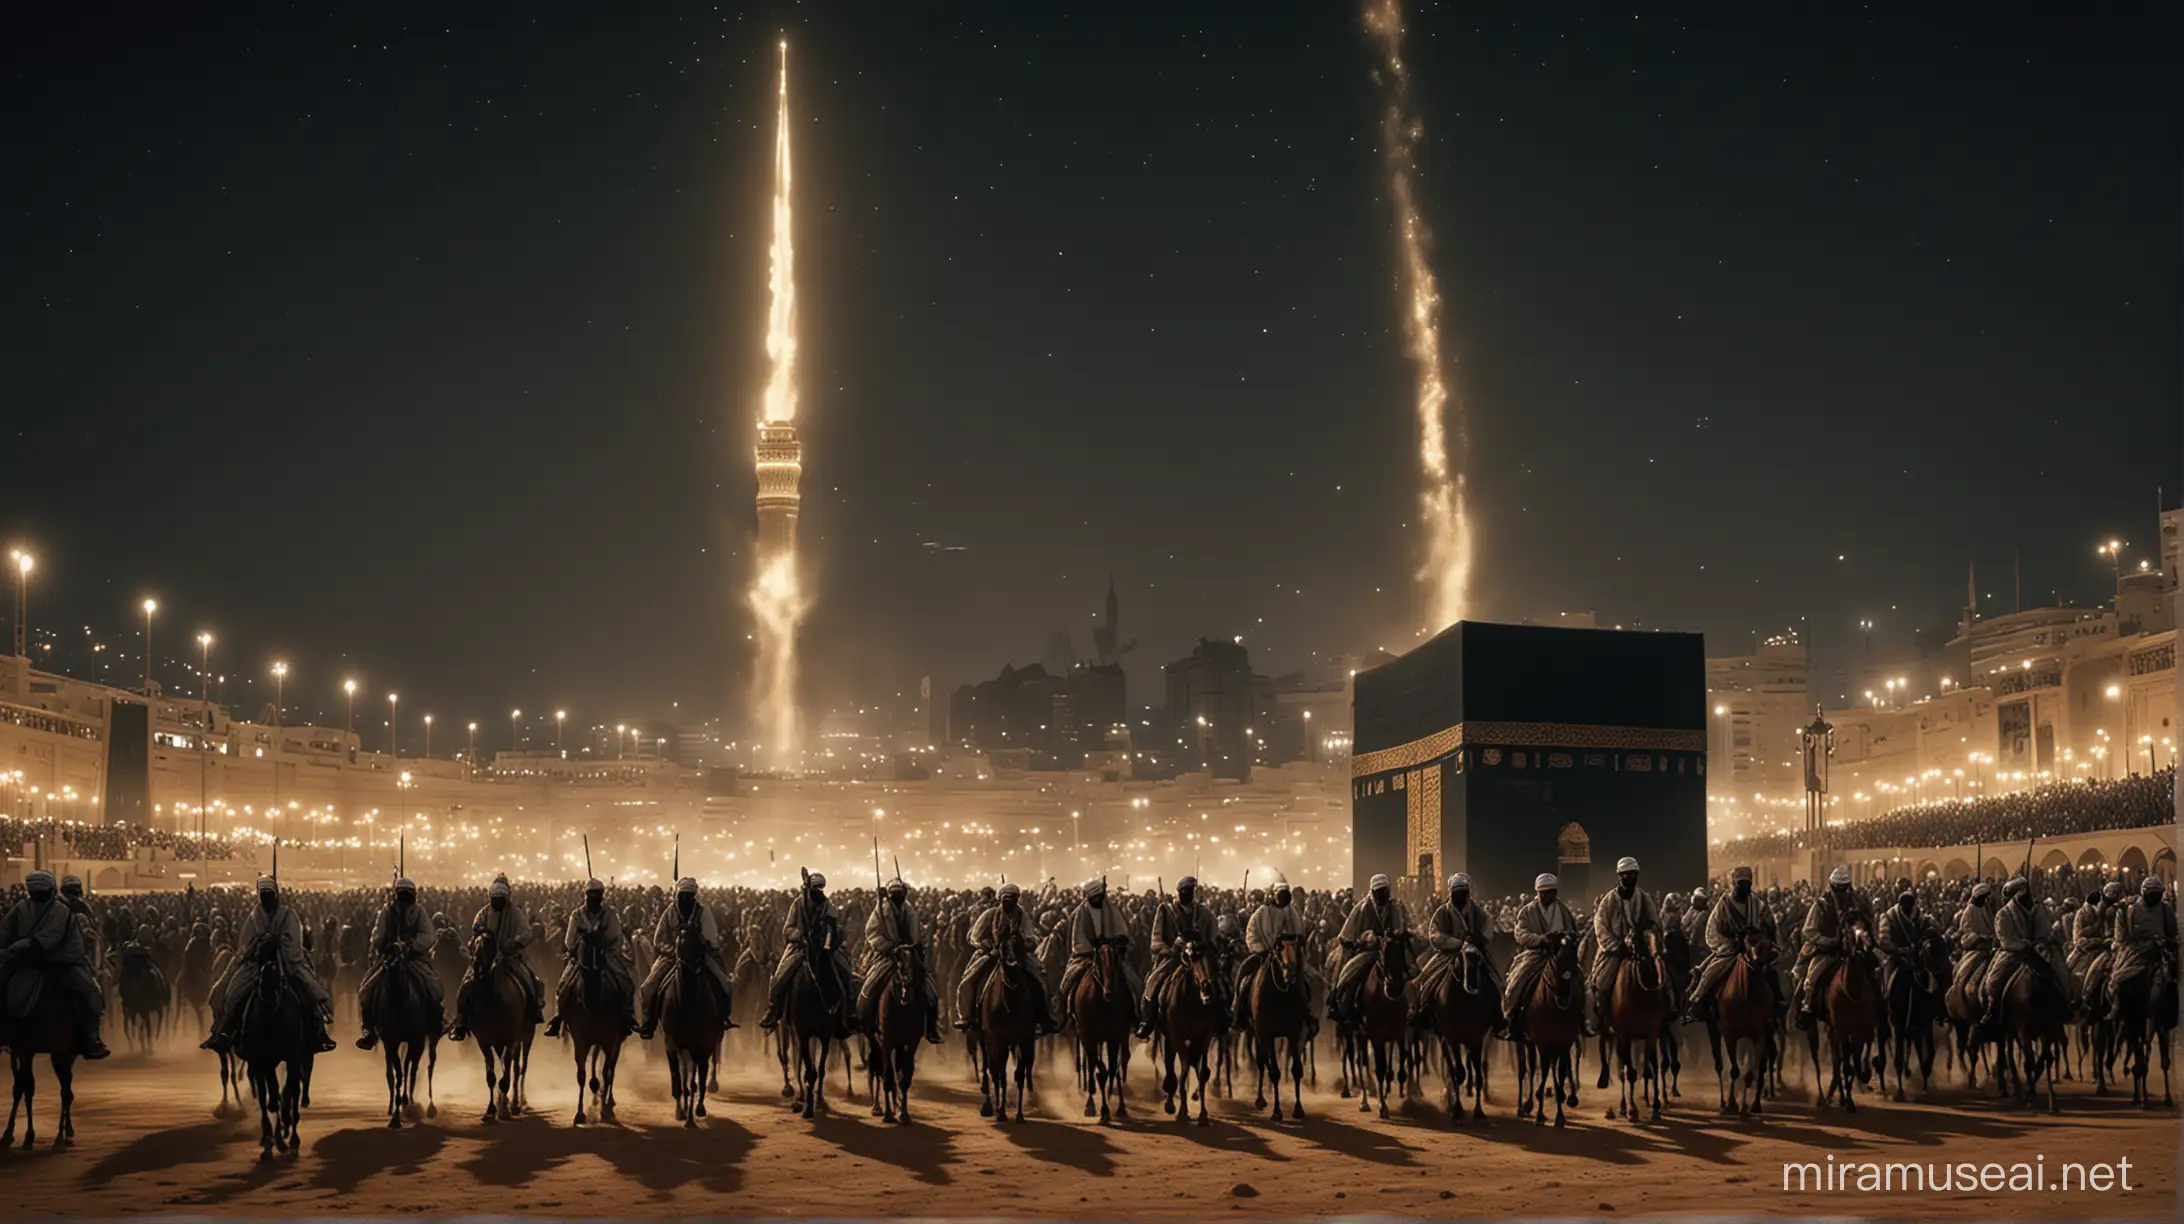 Prophet Muhammad Leading His Army to Conquer Mecca at Dusk